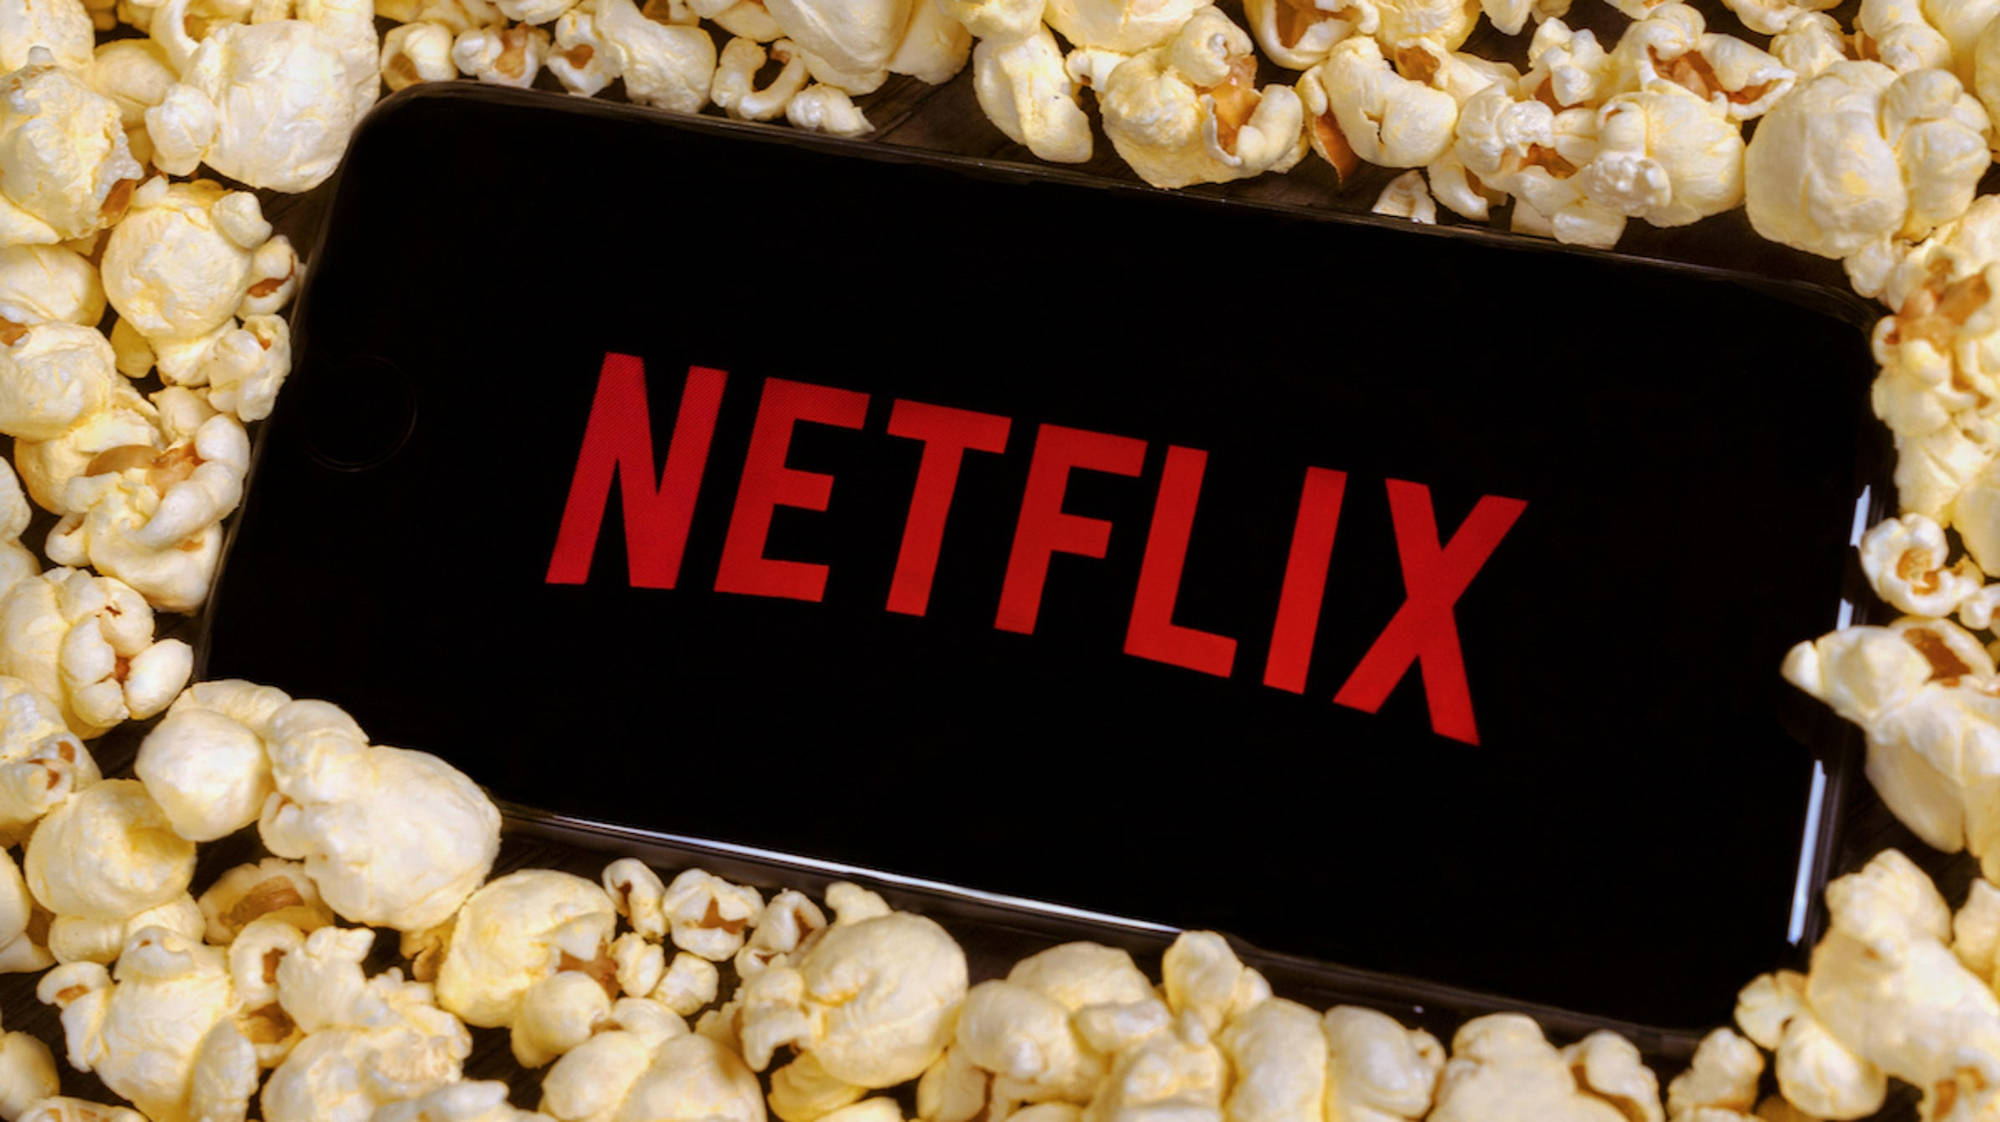 Netflix logo is seen on a smartphone surrounded by popcorn in this illustration photo taken on October 27, 2020. - Netflix, popcorn